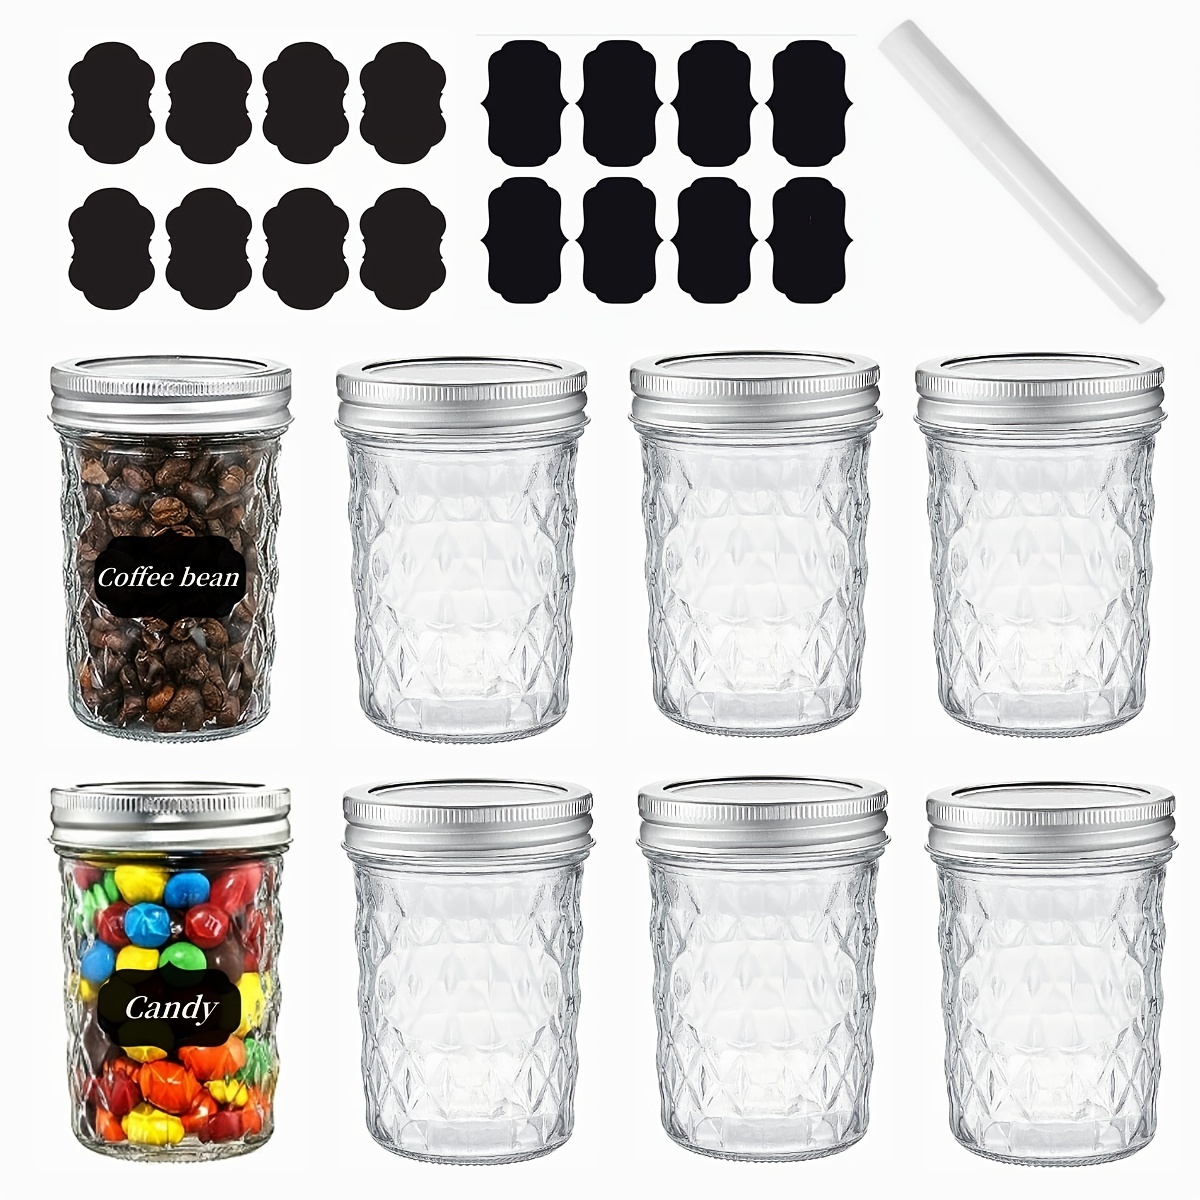 Small Mason Jars with Lids Set 8 oz. Set of 10, Bulk Pack - Glass Jars for  Overnight Oats, Candies, Fruits, Pickles, Spices, Beverages - Red 